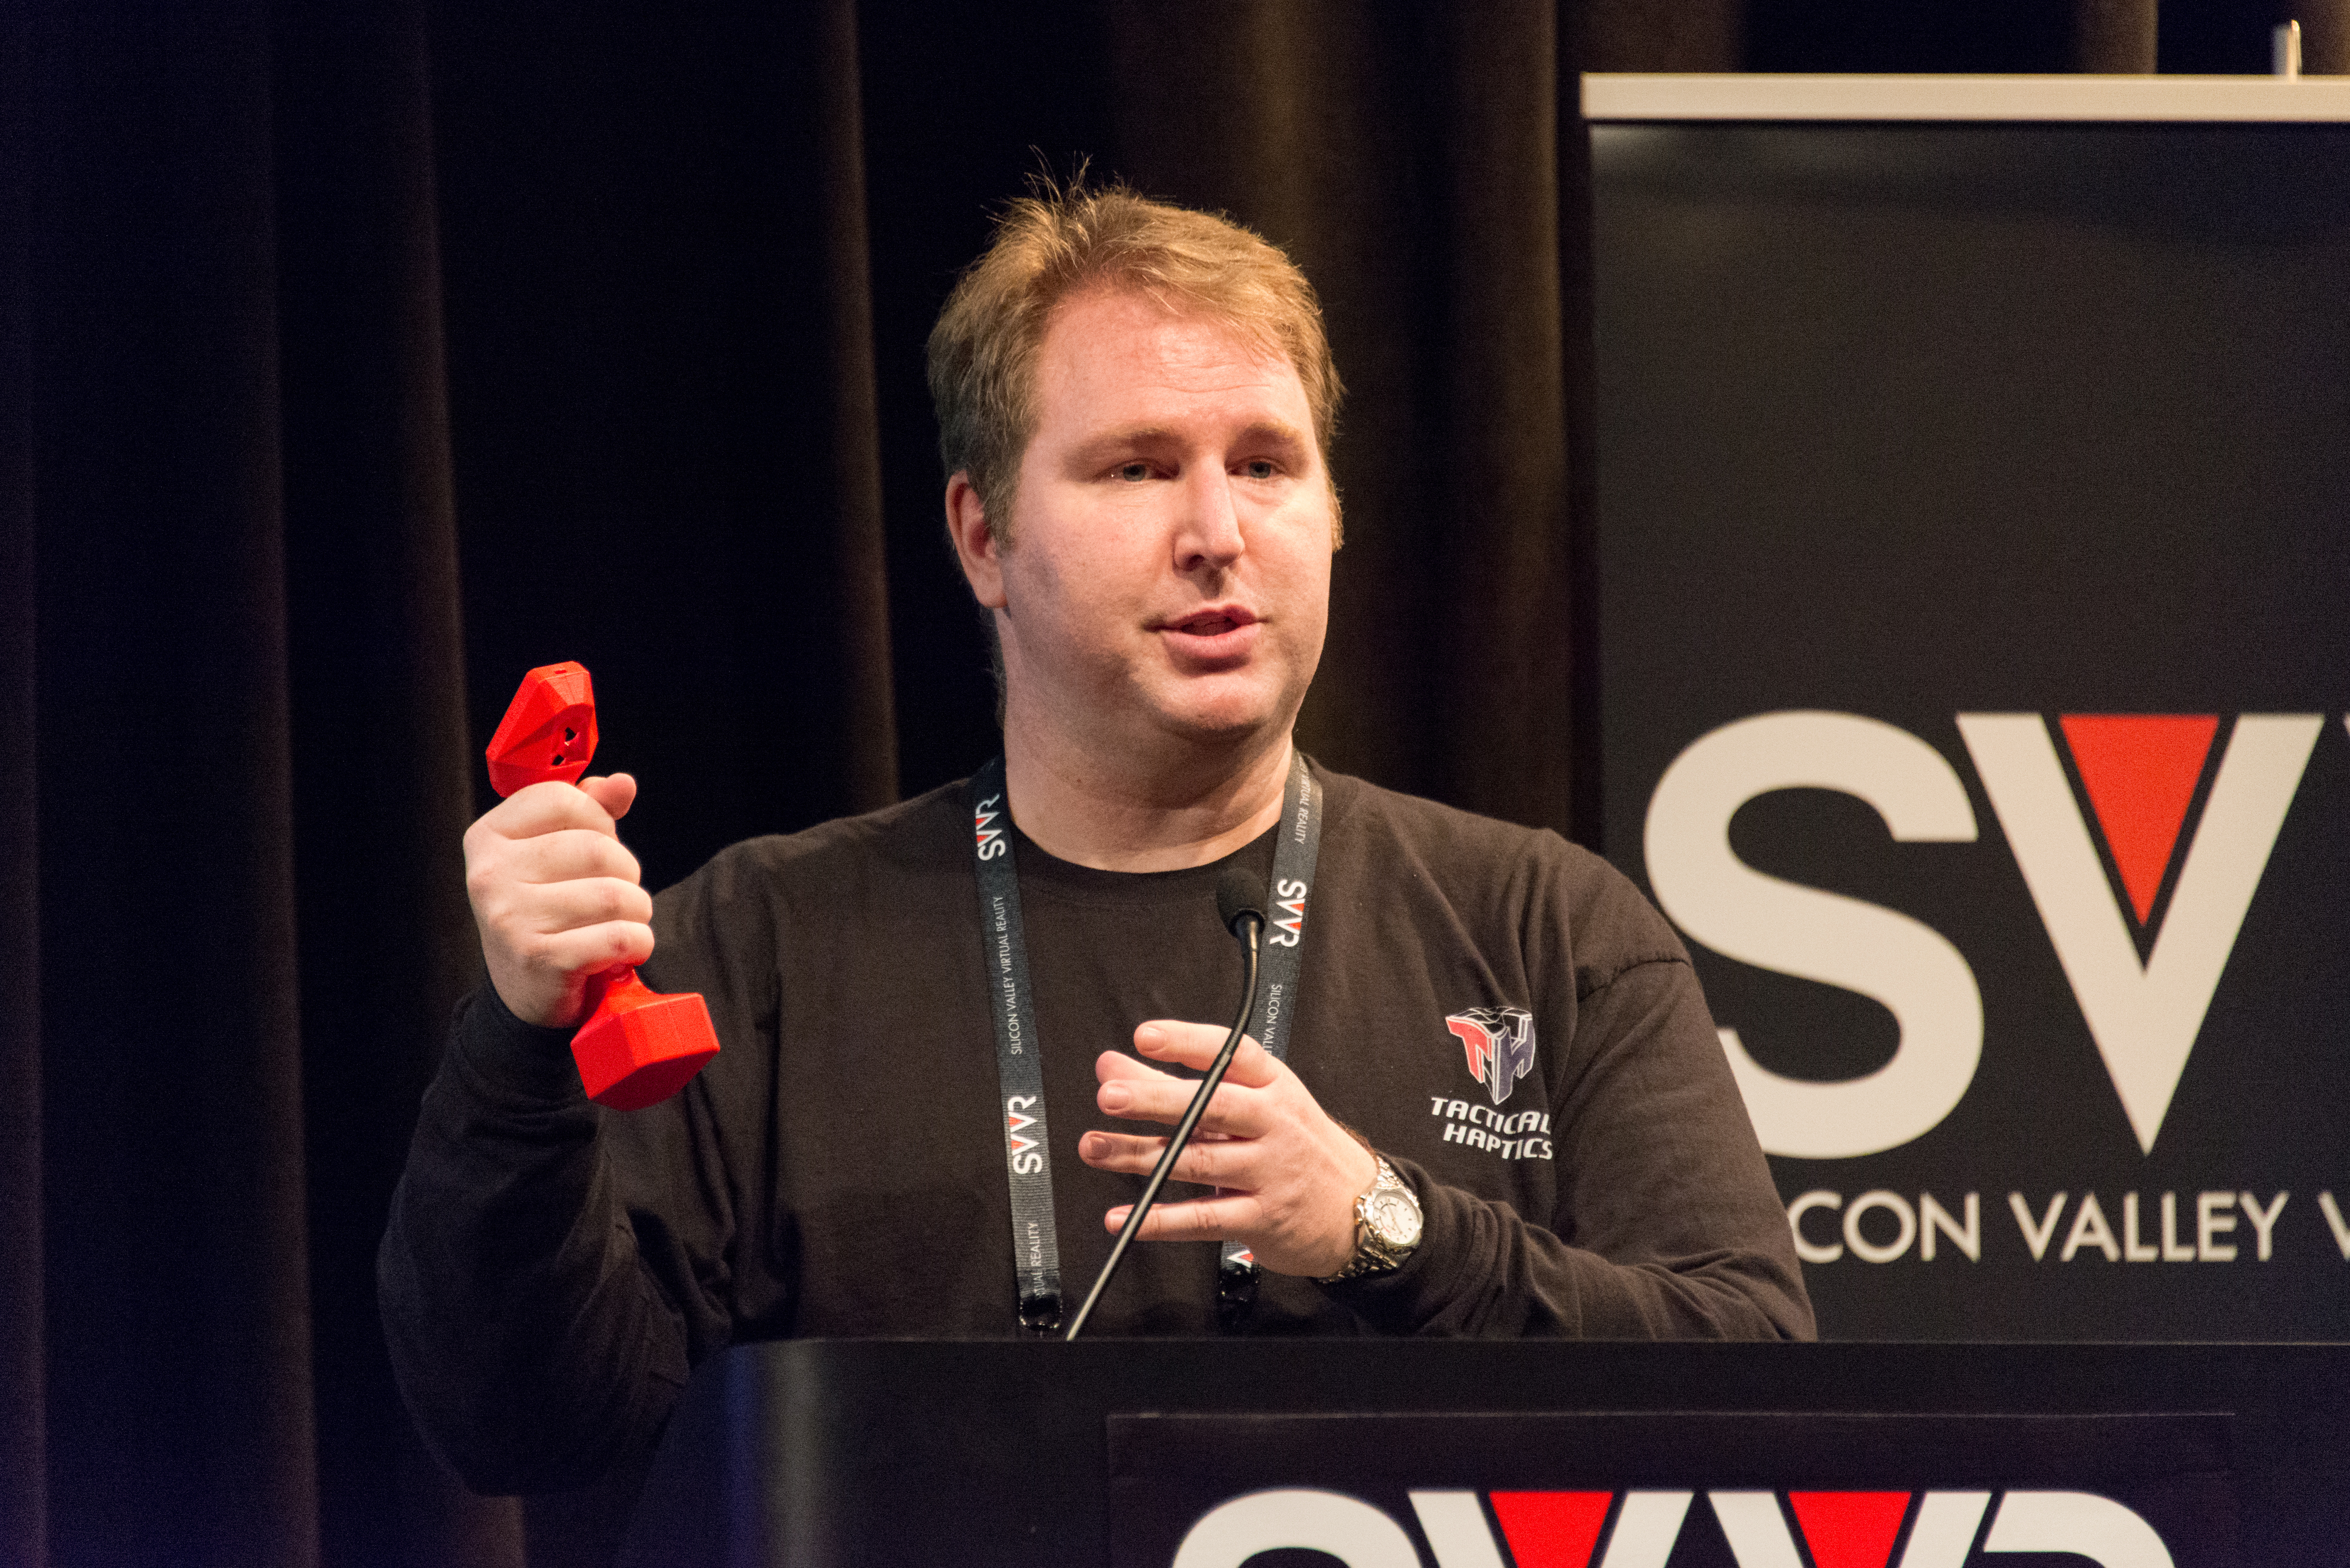 William provancher (founder/ceo of tactical haptics) giving 60 second pitch at svvr and showing reactive grip photo